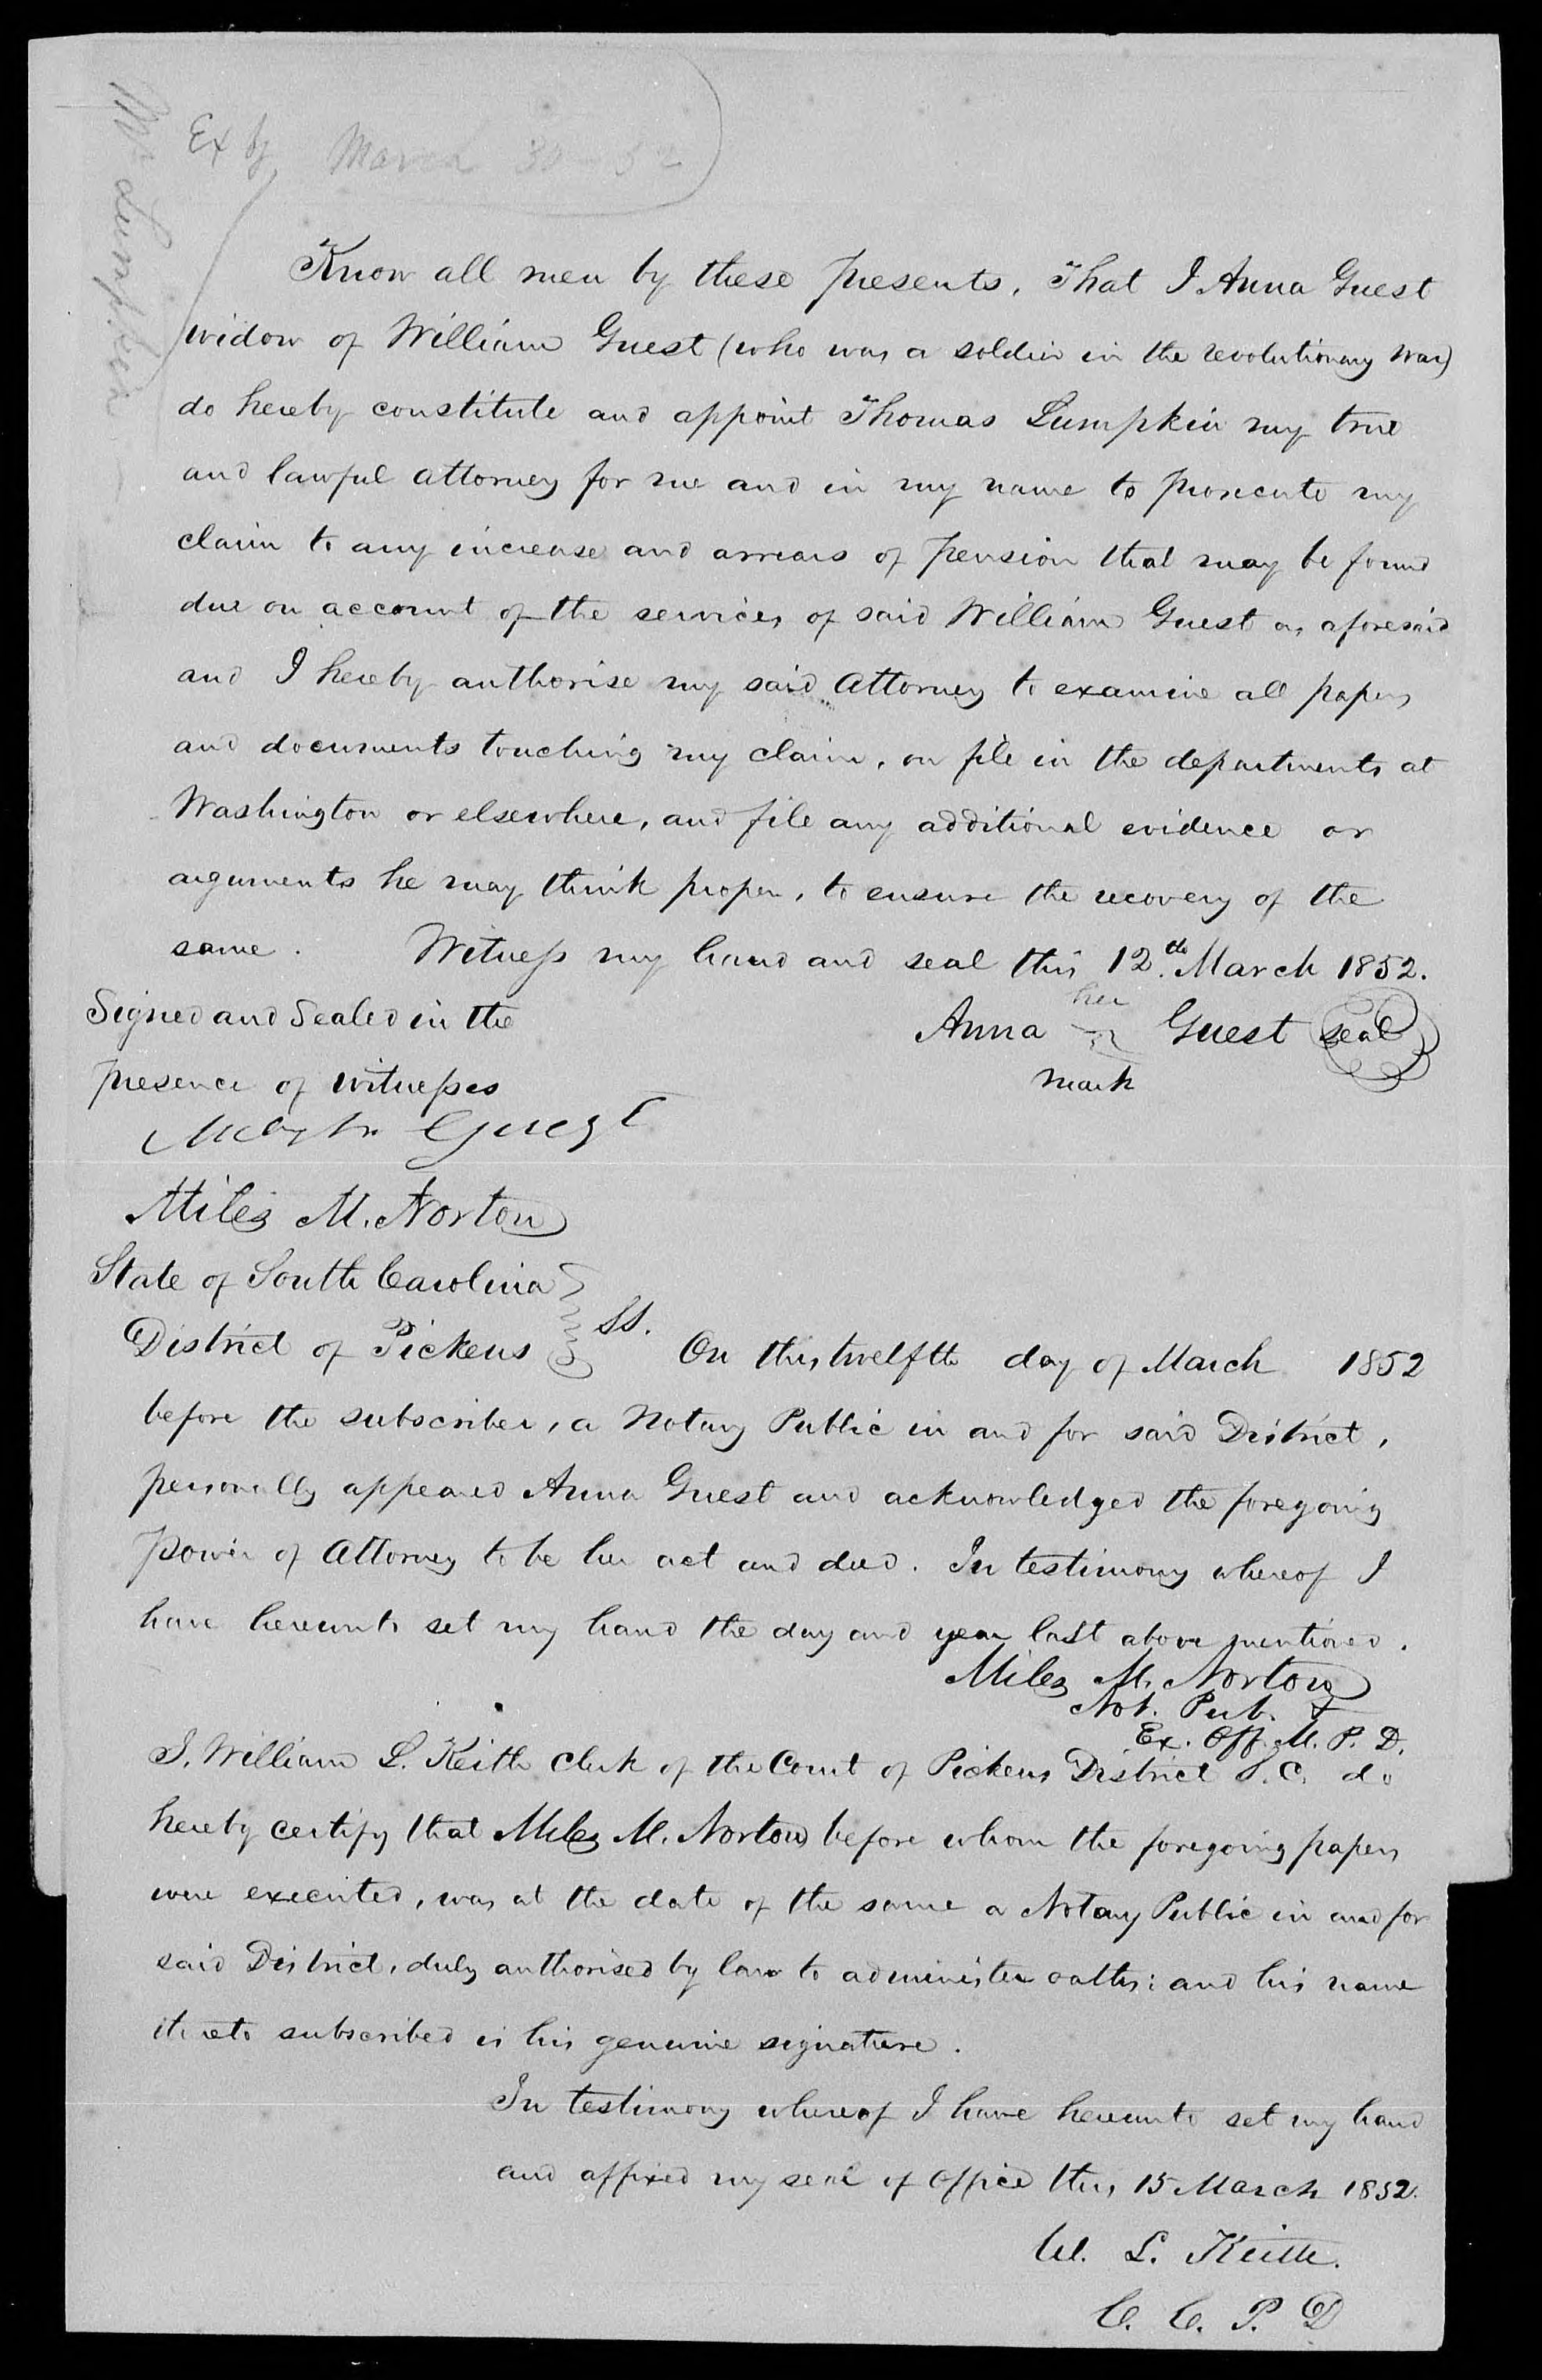 Appointment of Thomas Lumpkin as Anna Guest's Power of Attorney, 12 March 1852